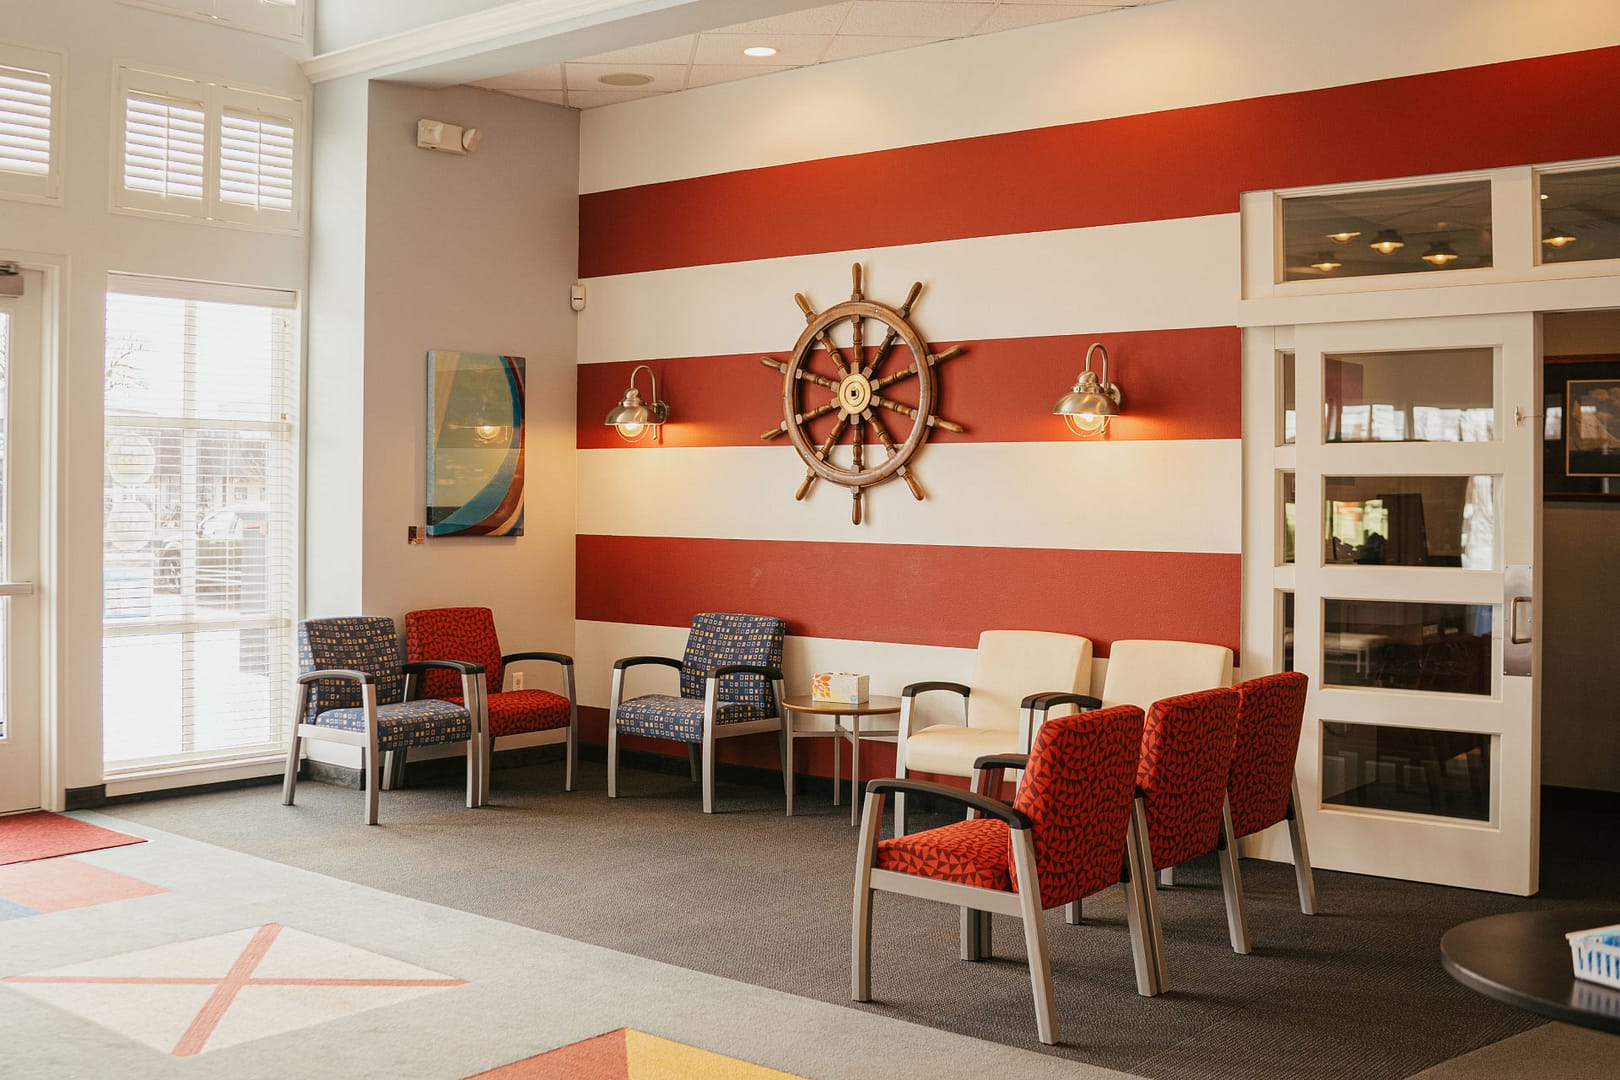 reception area with red striped wall and sailing boat wheel on wall